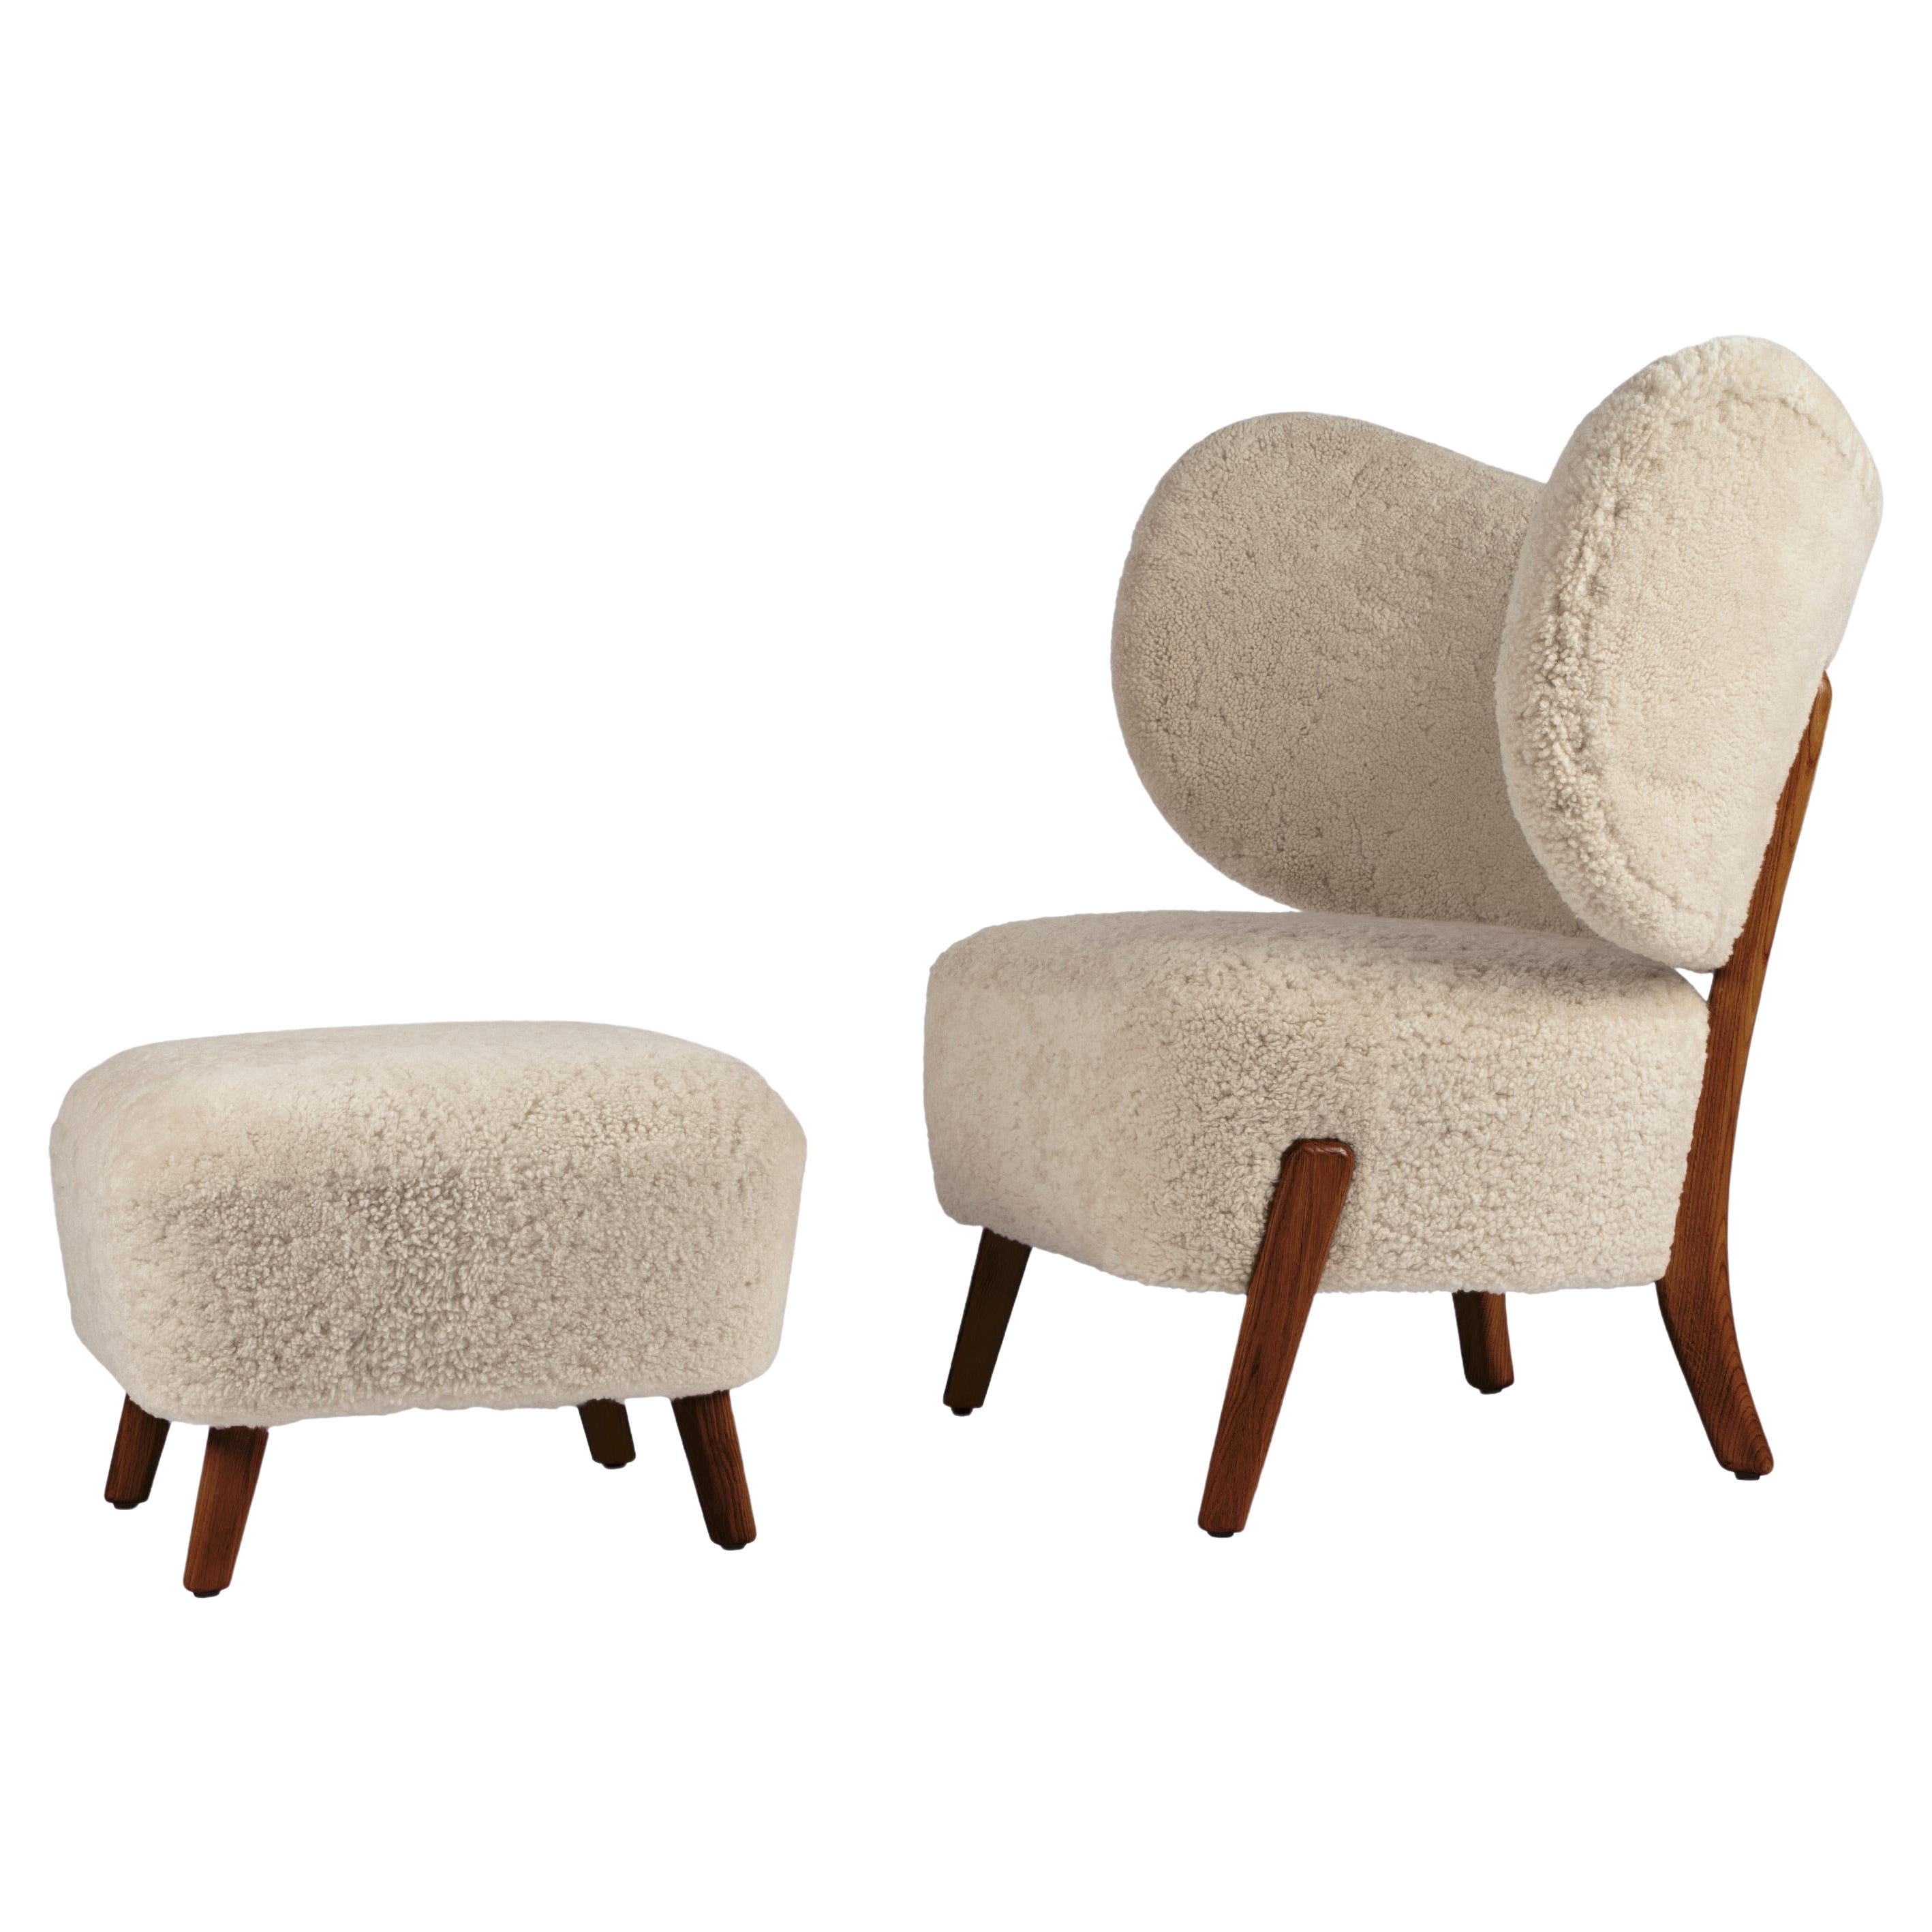 Moonlight Sheepskin Set of TMBO Lounge Chair & Pouff by Mazo Design For Sale